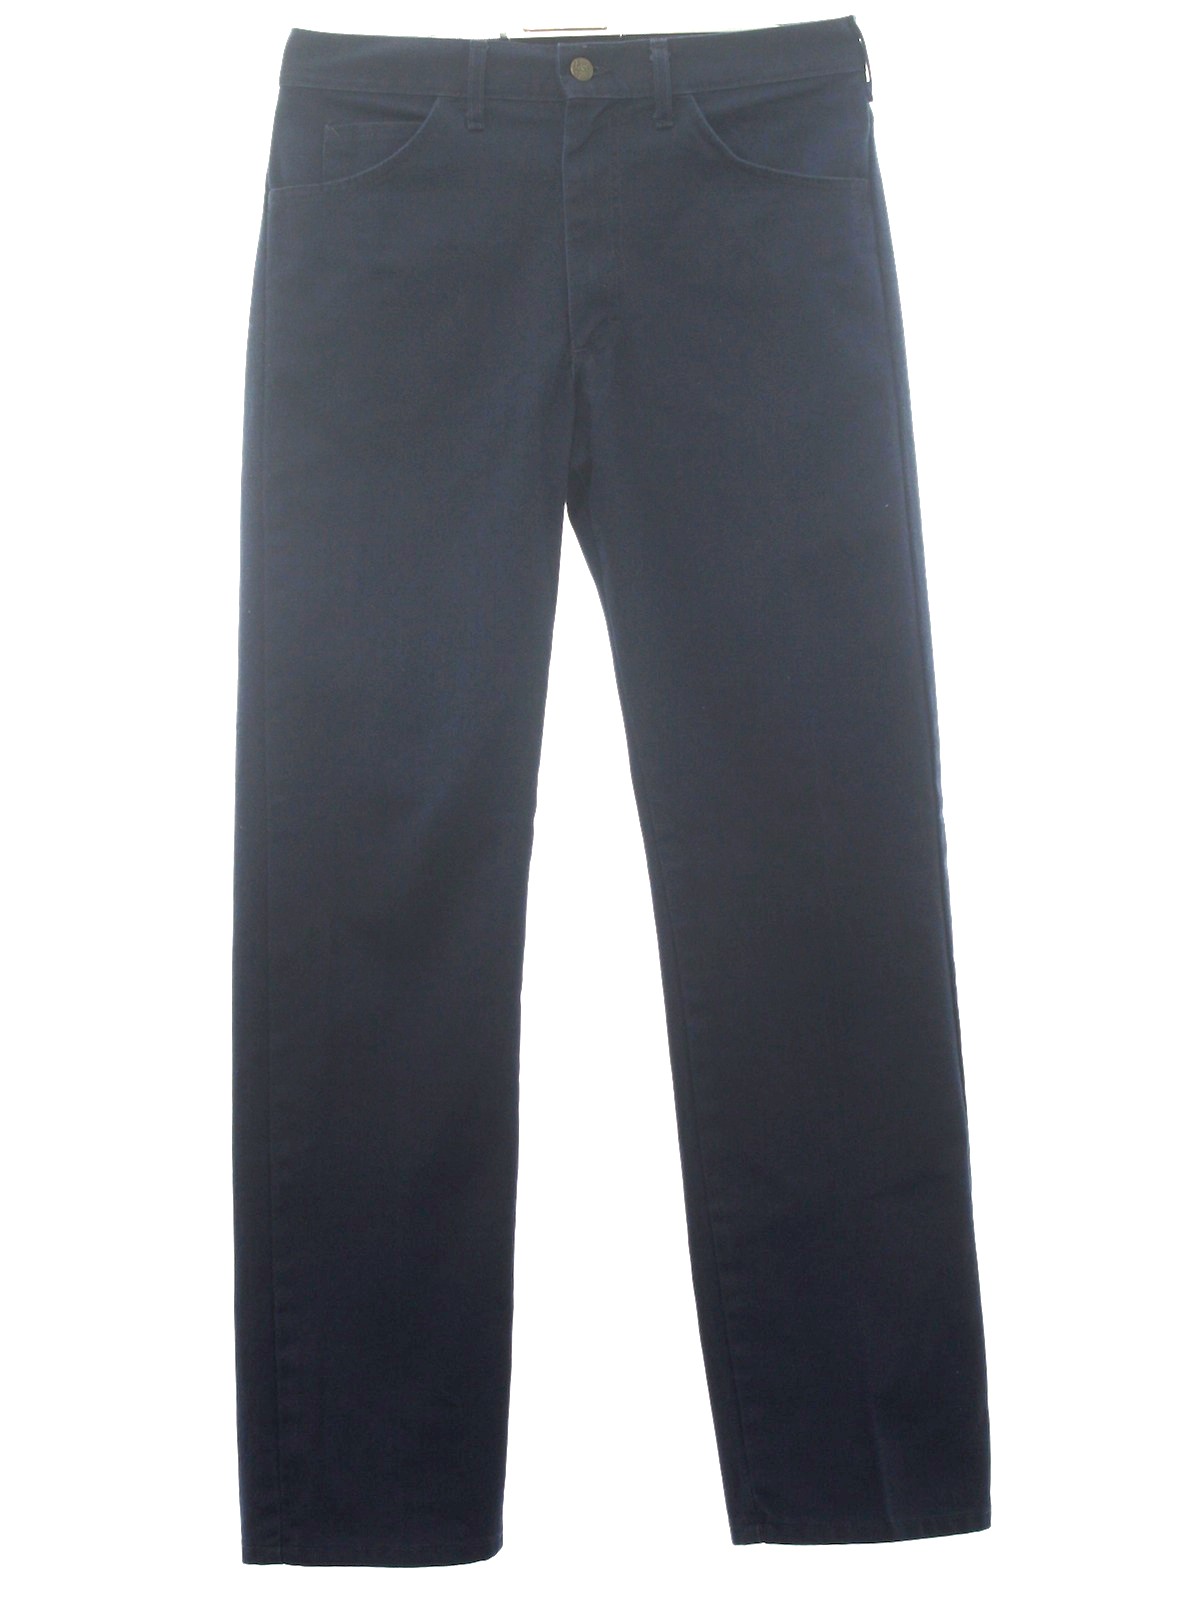 Vintage 1980's Pants: 80s -Lee- Mens navy blue cotton and polyester ...